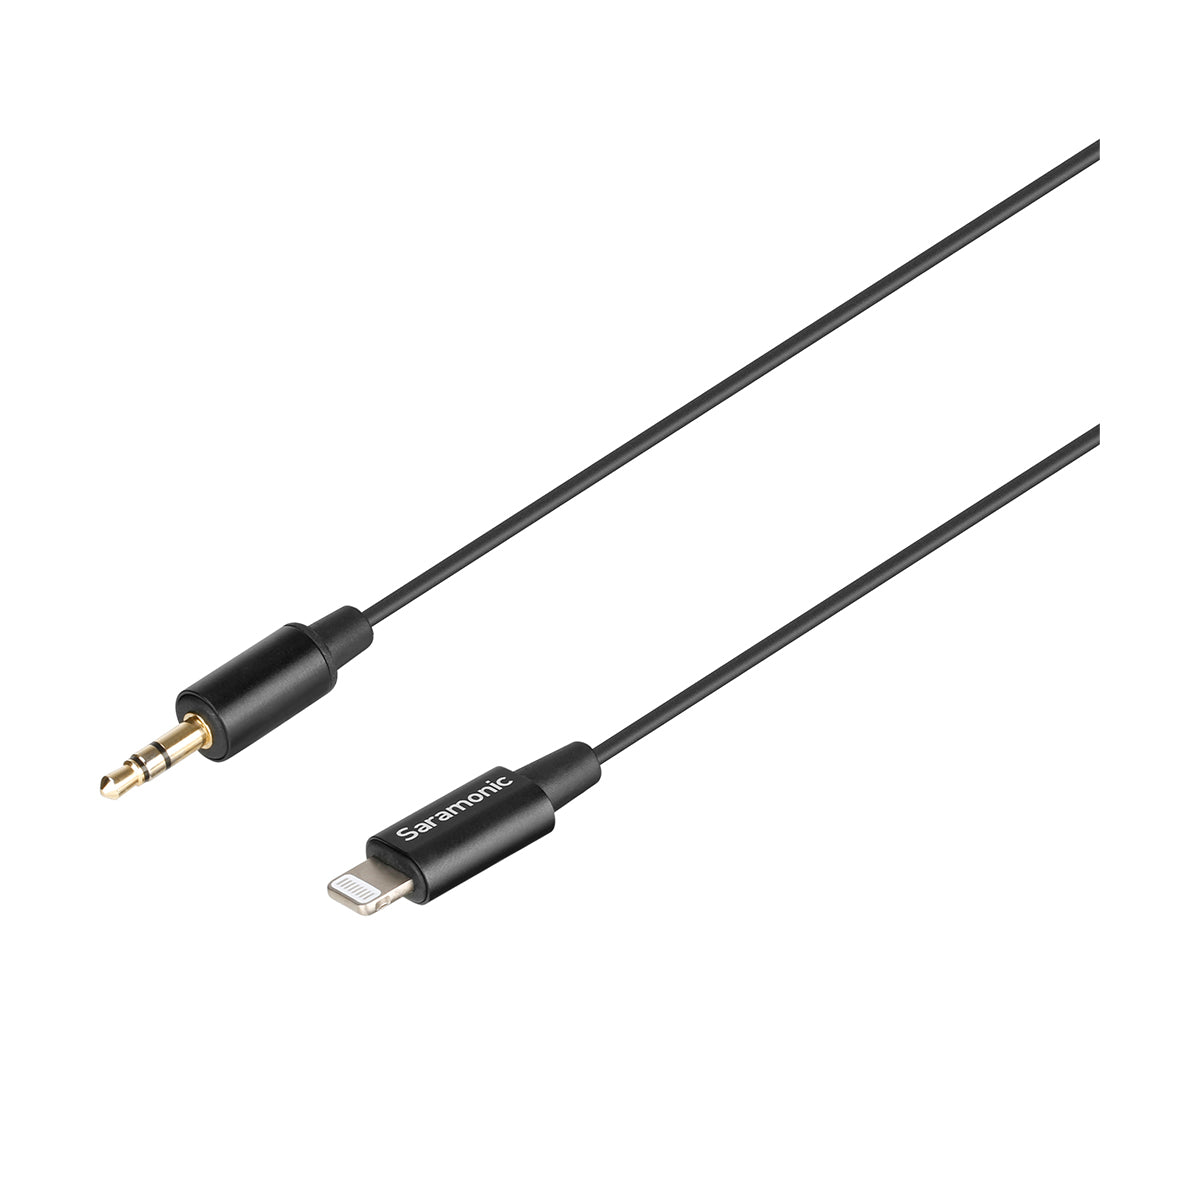 Saramonic 3.5mm TRS Male to Lightning Adapter Cable for Audio to iPhone (9")